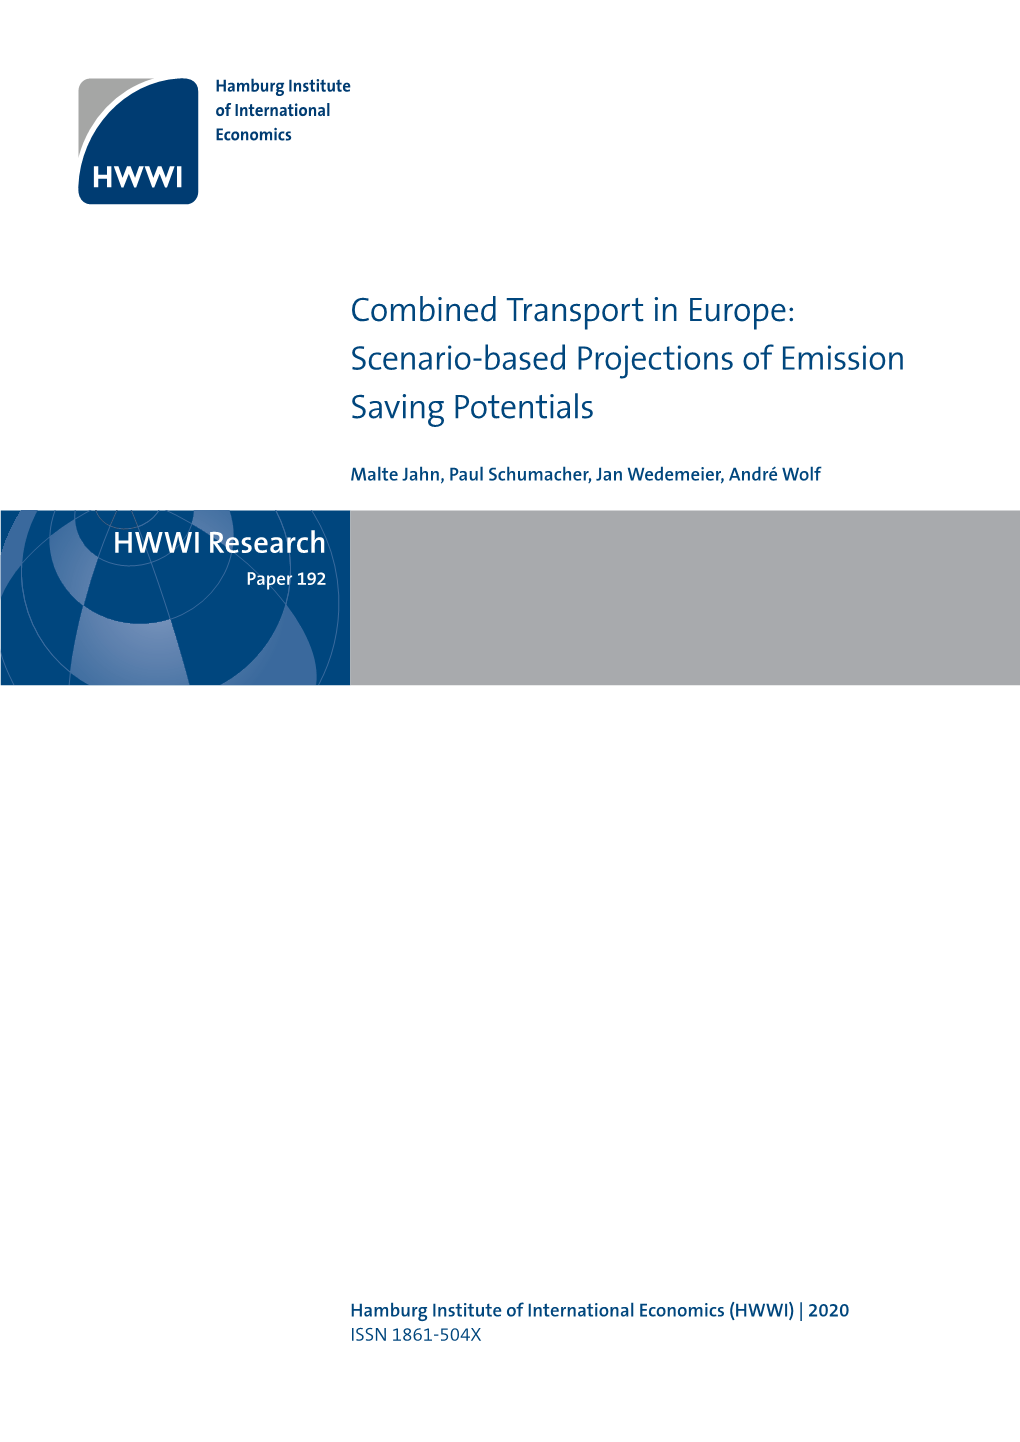 Combined Transport in Europe: Scenario-Based Projections of Emission Saving Potentials